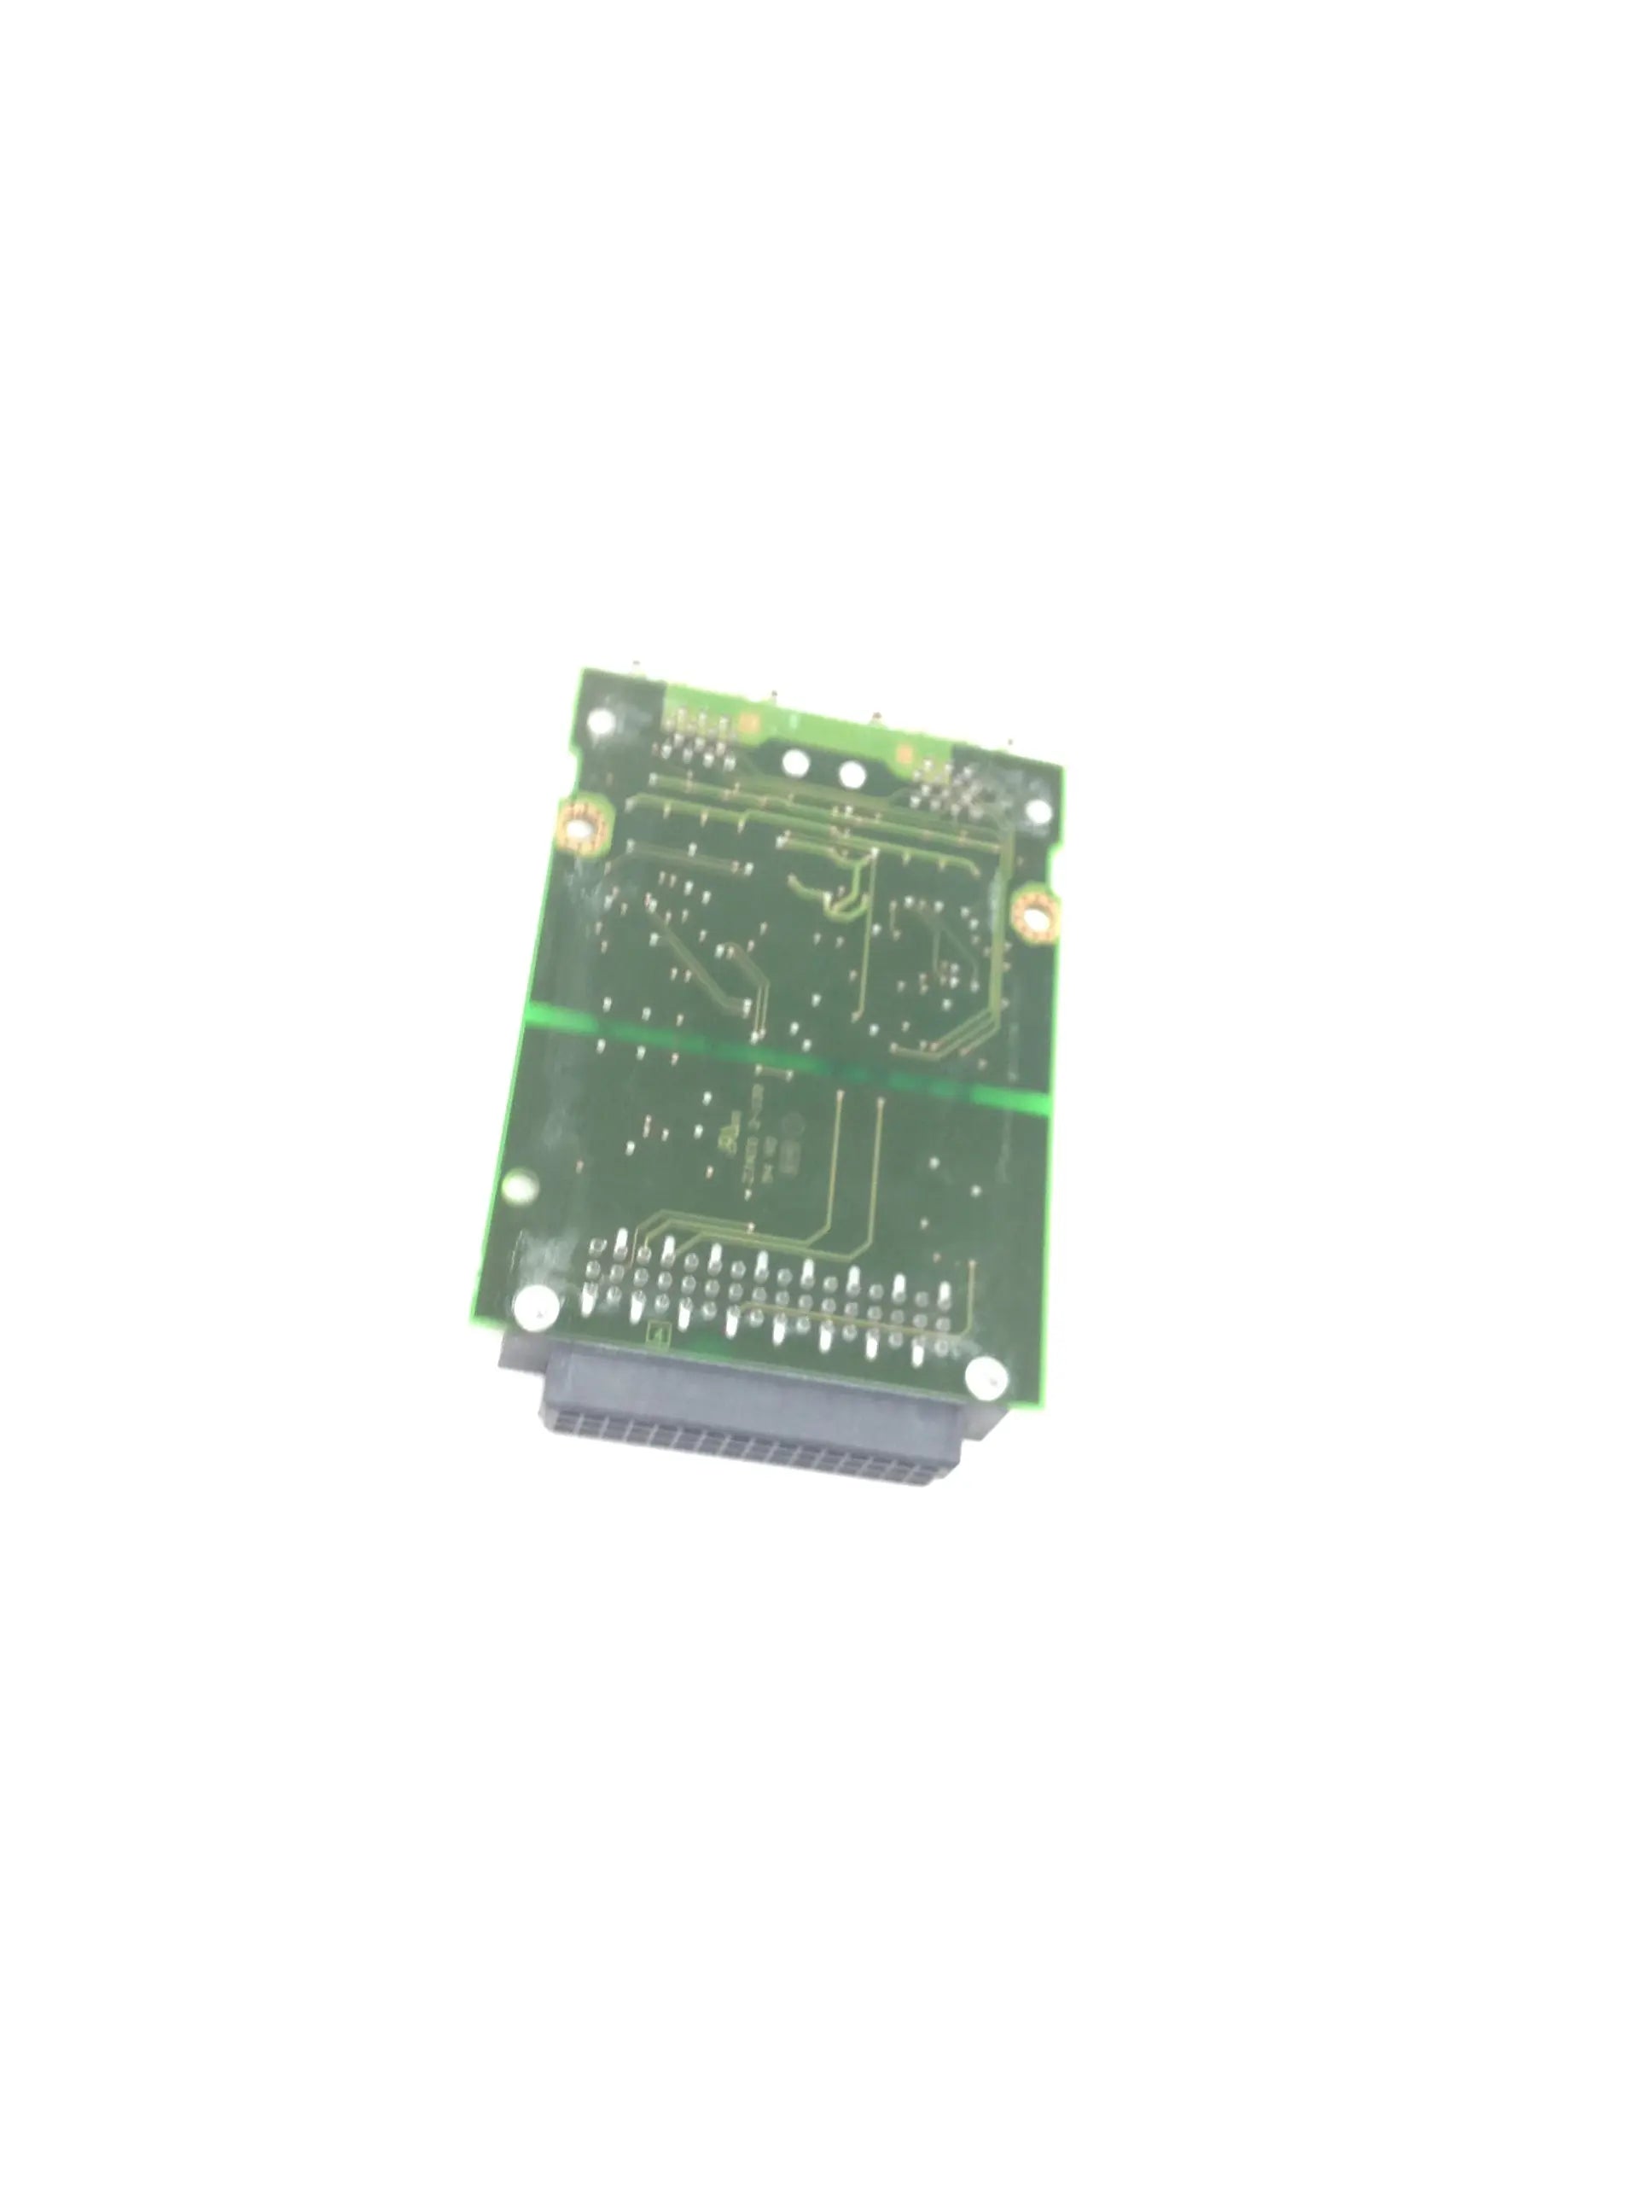 Load image into Gallery viewer, A Biomedical Service Philips MP M8086-67021 Monitor Remote Interface Circuit Board Card 